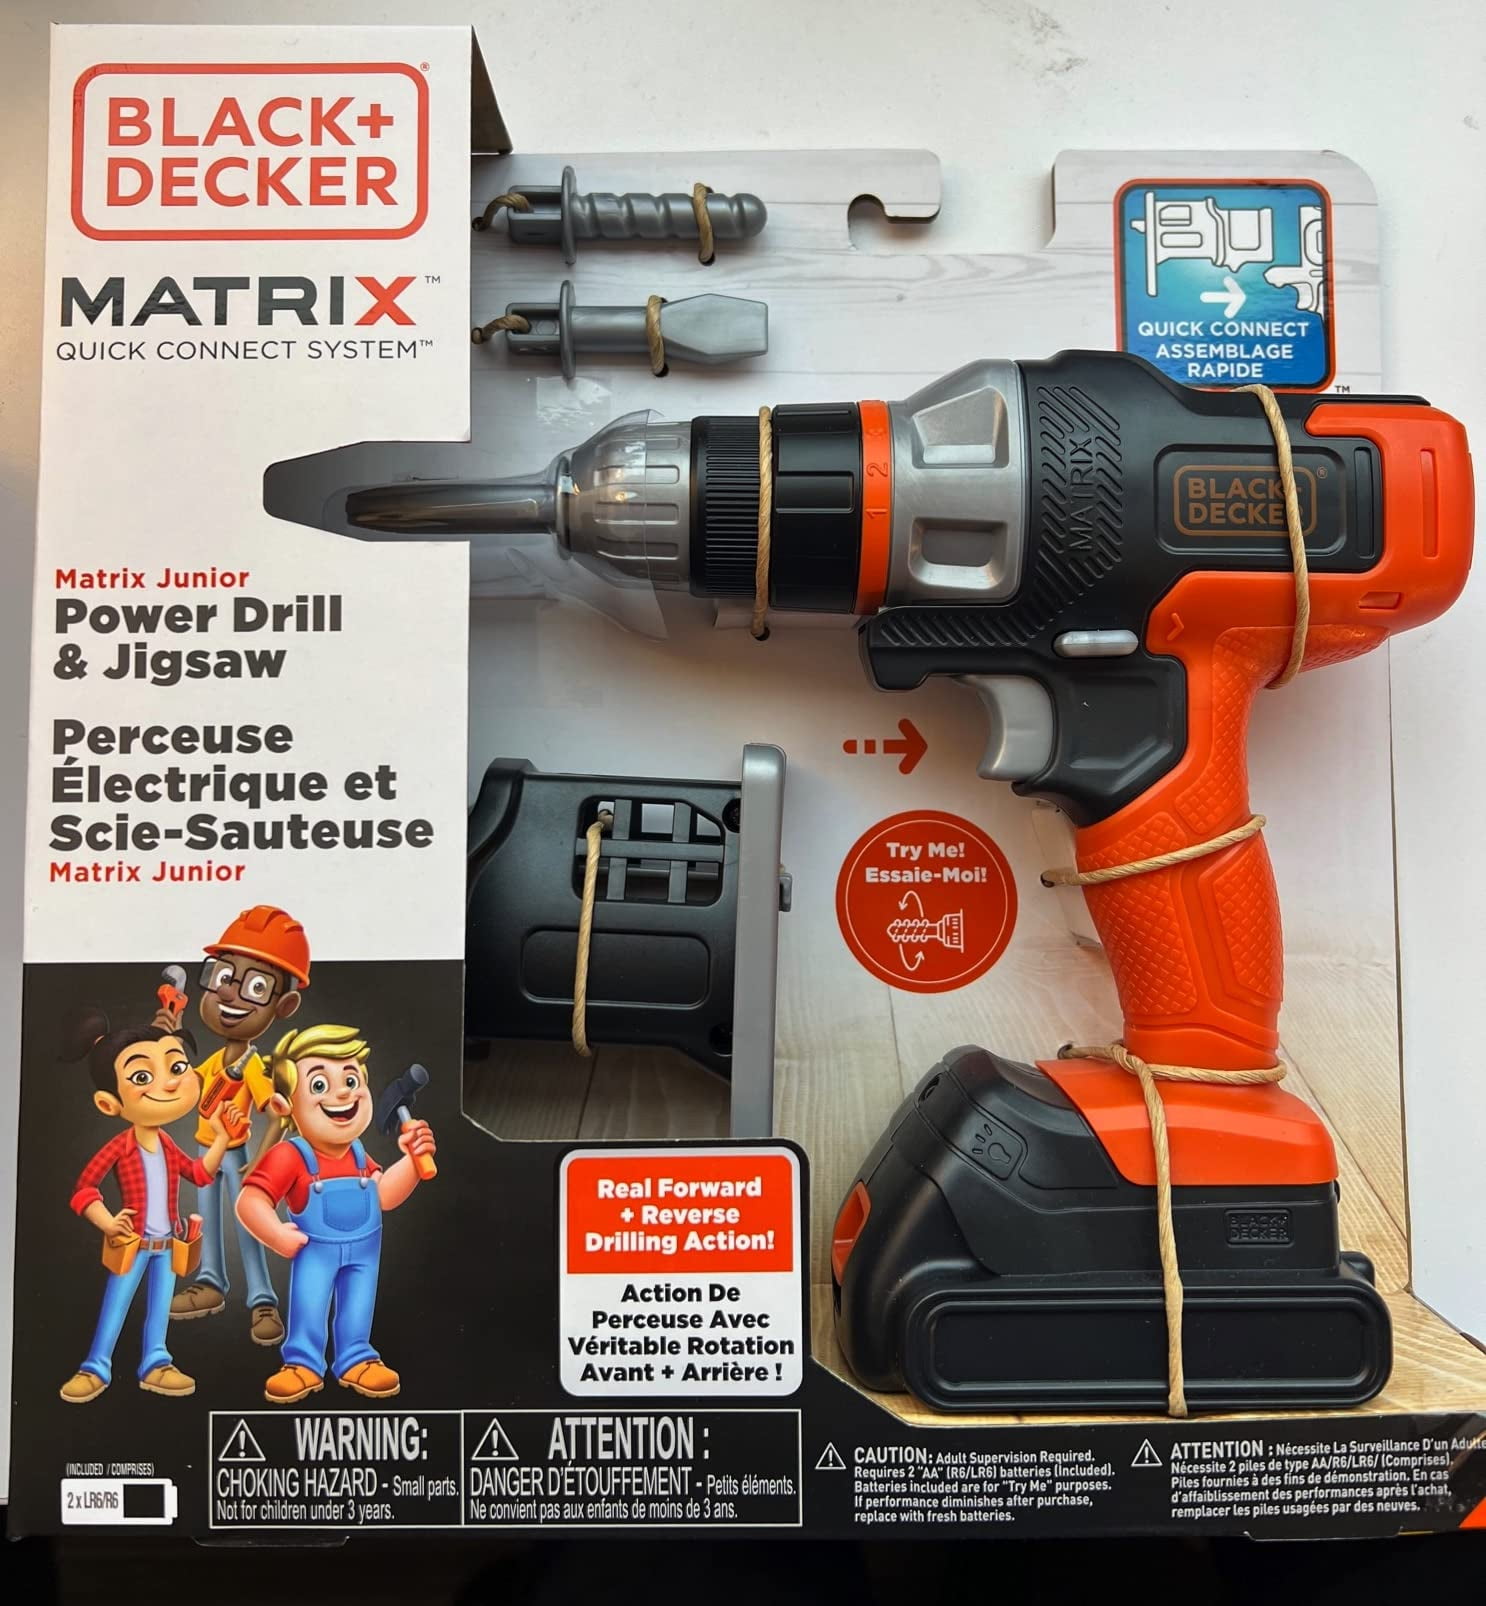  Black+Decker Kids Tool Set All-in-One Mega Case Workshop with  Electronic Toy Matrix Drill, Jigsaw and Sander Attachments, 25 Tools &  Accessories, Play Tools for Toddlers & Kids : Toys & Games